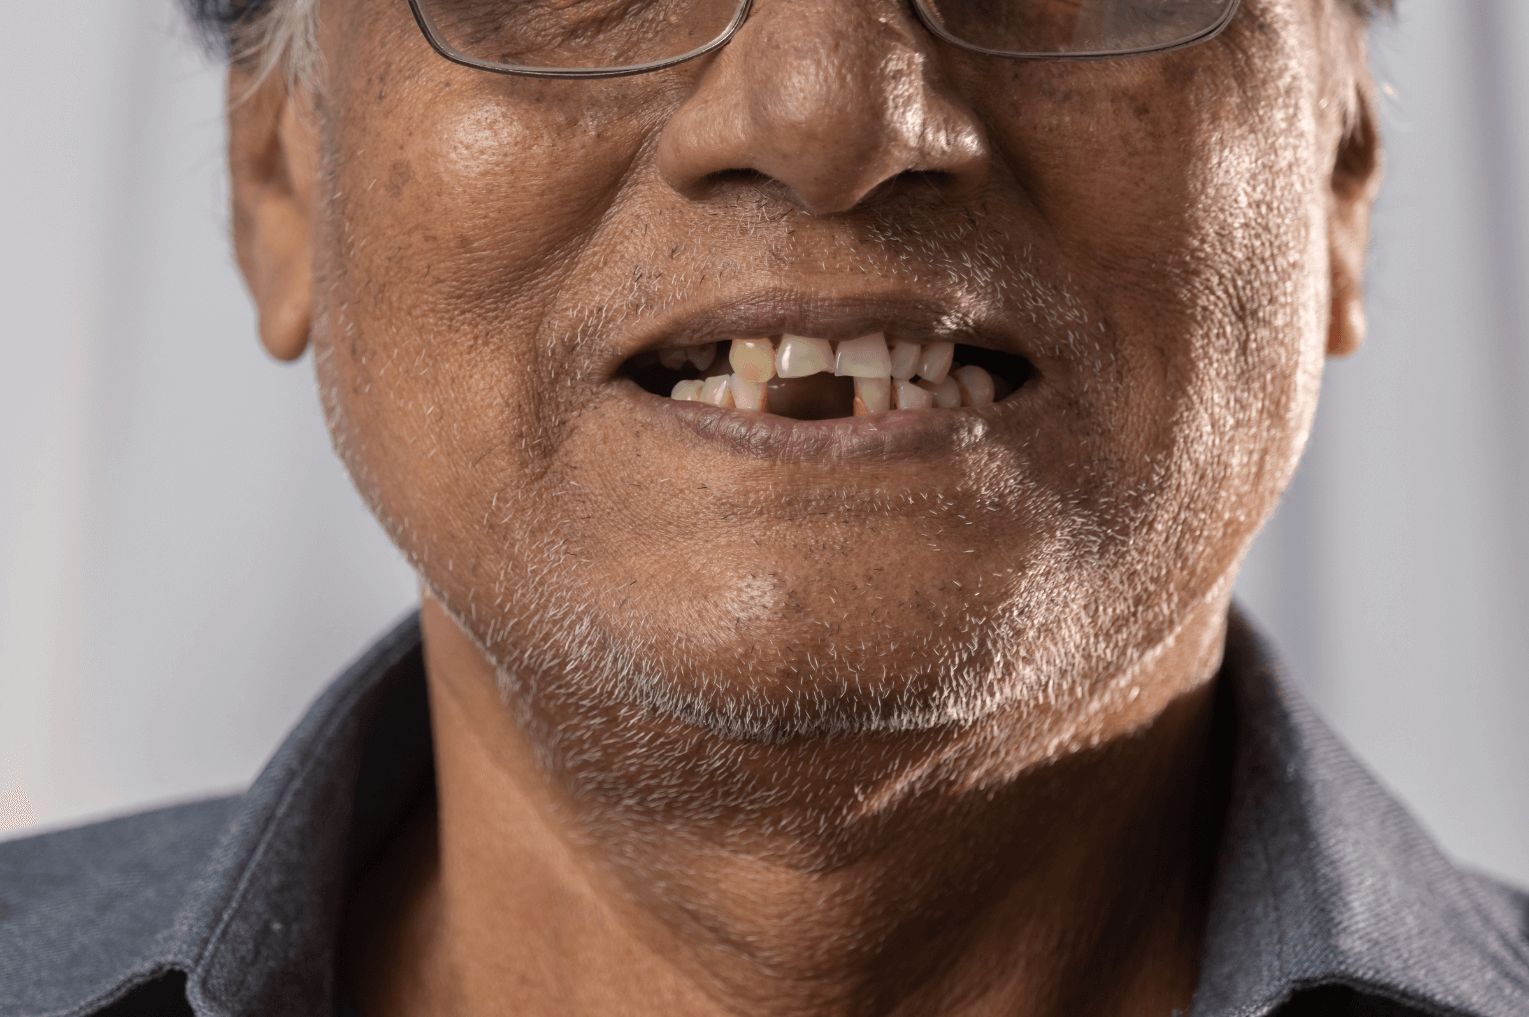 Man with missing teeth in London